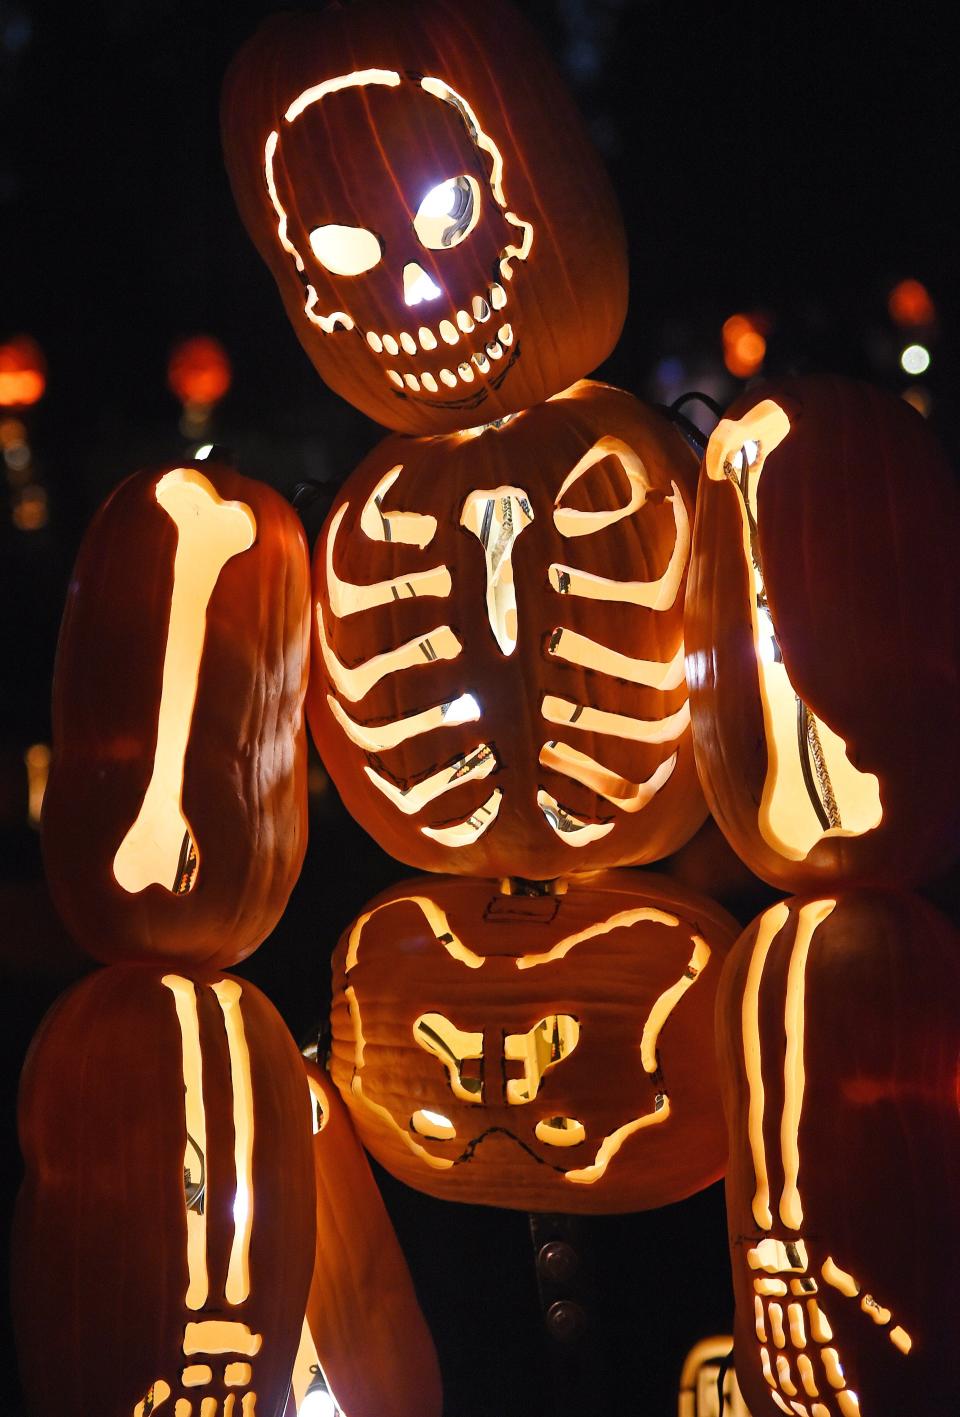 Multiple carved pumpkins create a skeleton at a display in California in 2014.